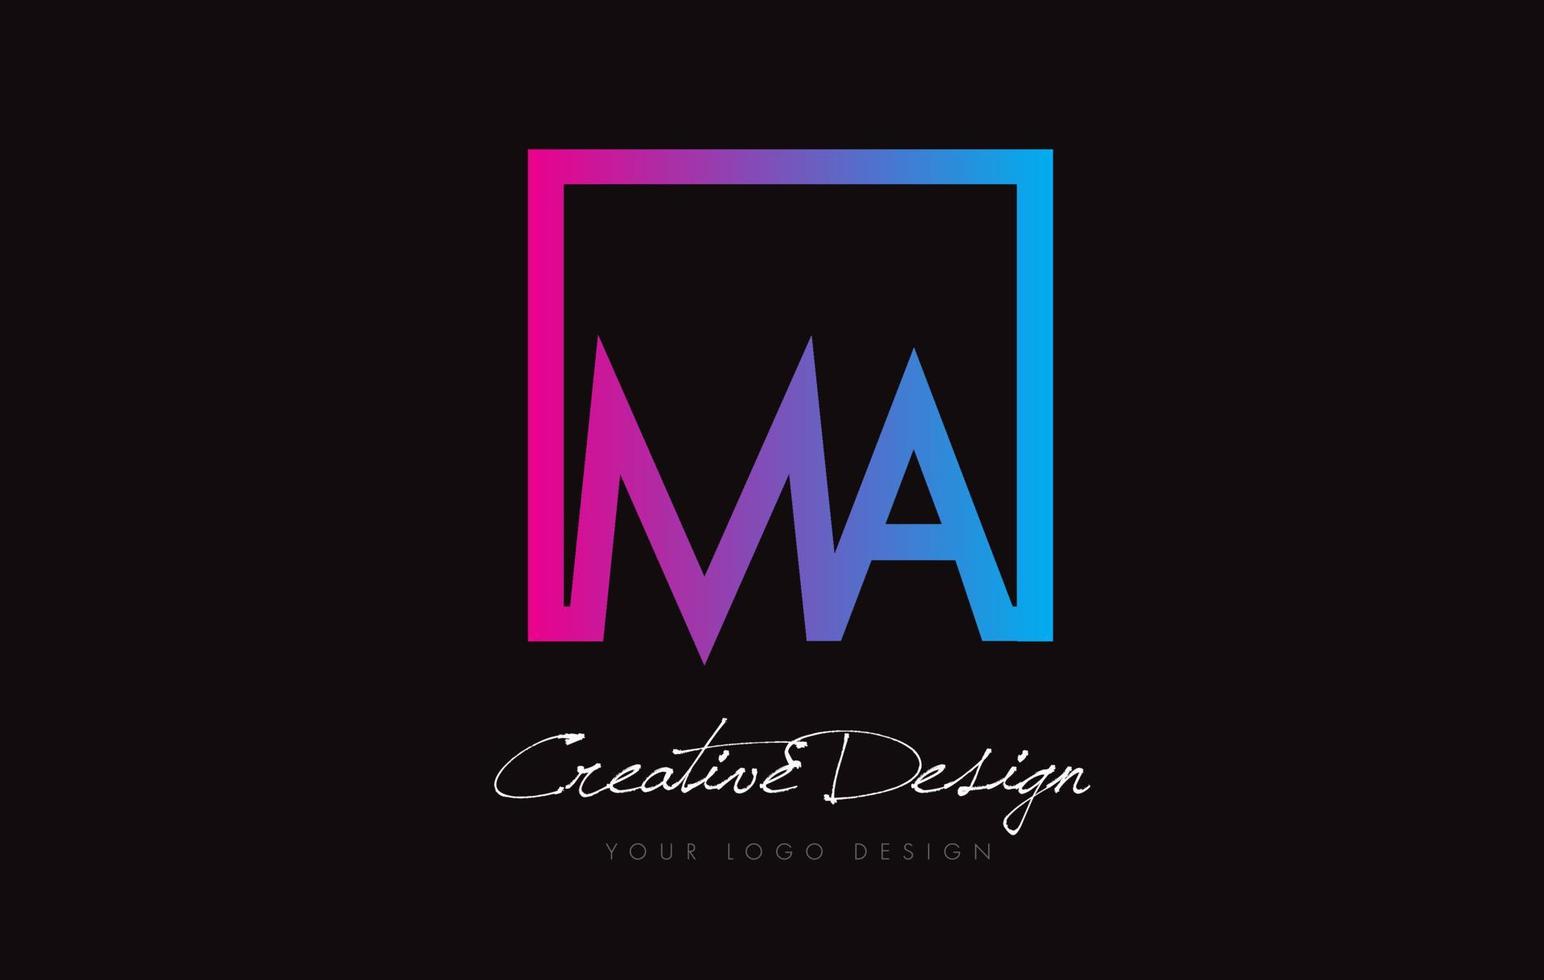 MA Square Frame Letter Logo Design with Purple Blue Colors. vector